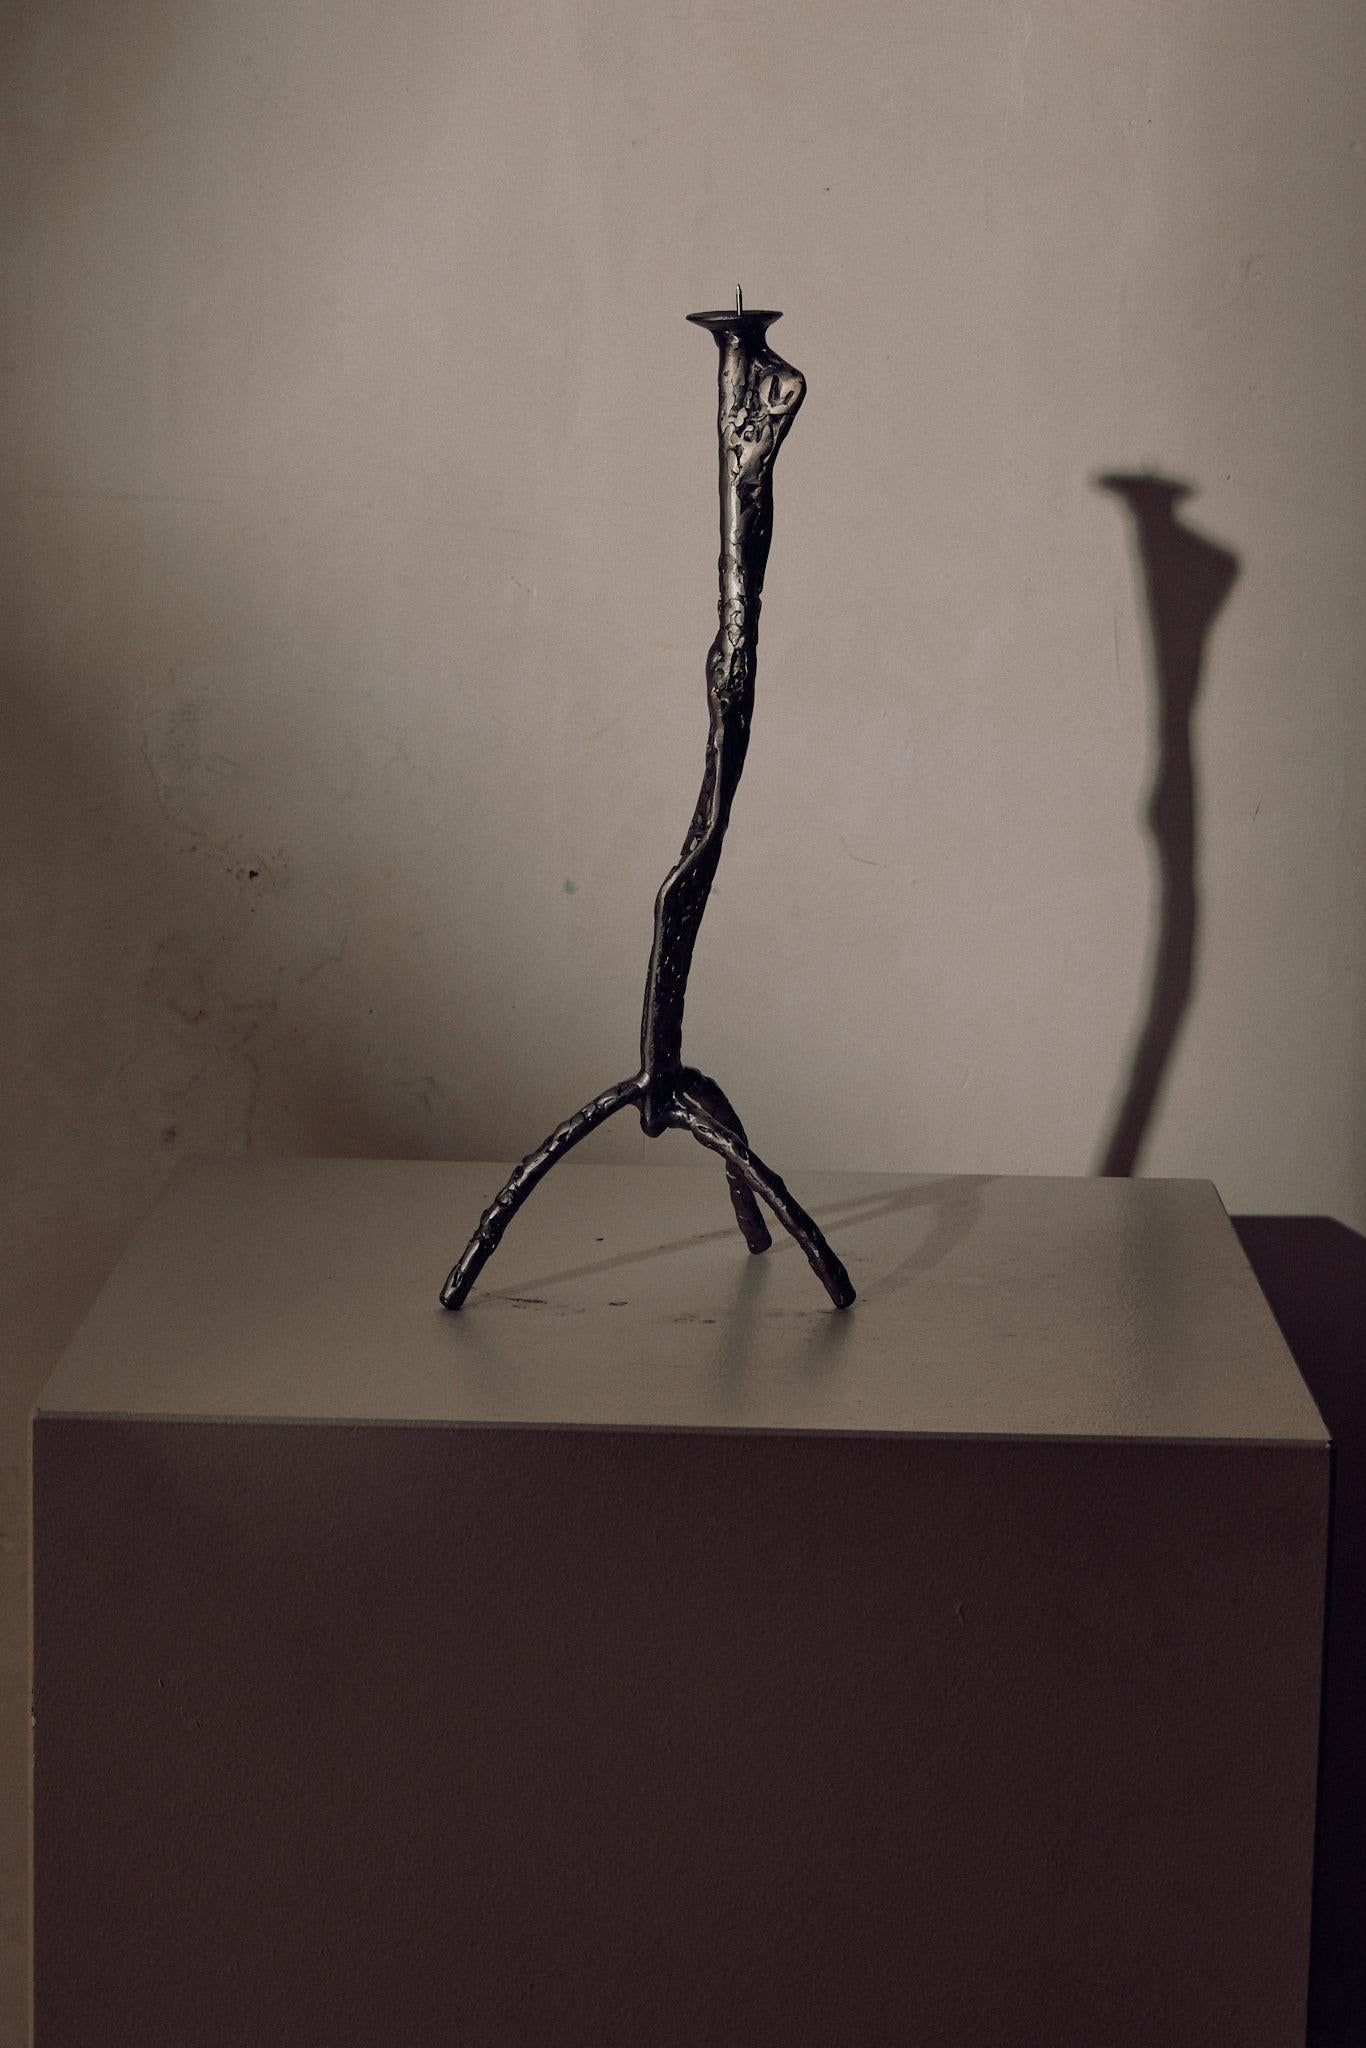 Large candle stick by Michael Gittings
Dimensions: D 35 x W 35 x H 35 cm.
Materials: Stainless steel.

Michael Gittings
Michael Gittings imagines with his hands. Since establishing his studio in 2016, the Melbourne based designer and sculptor has